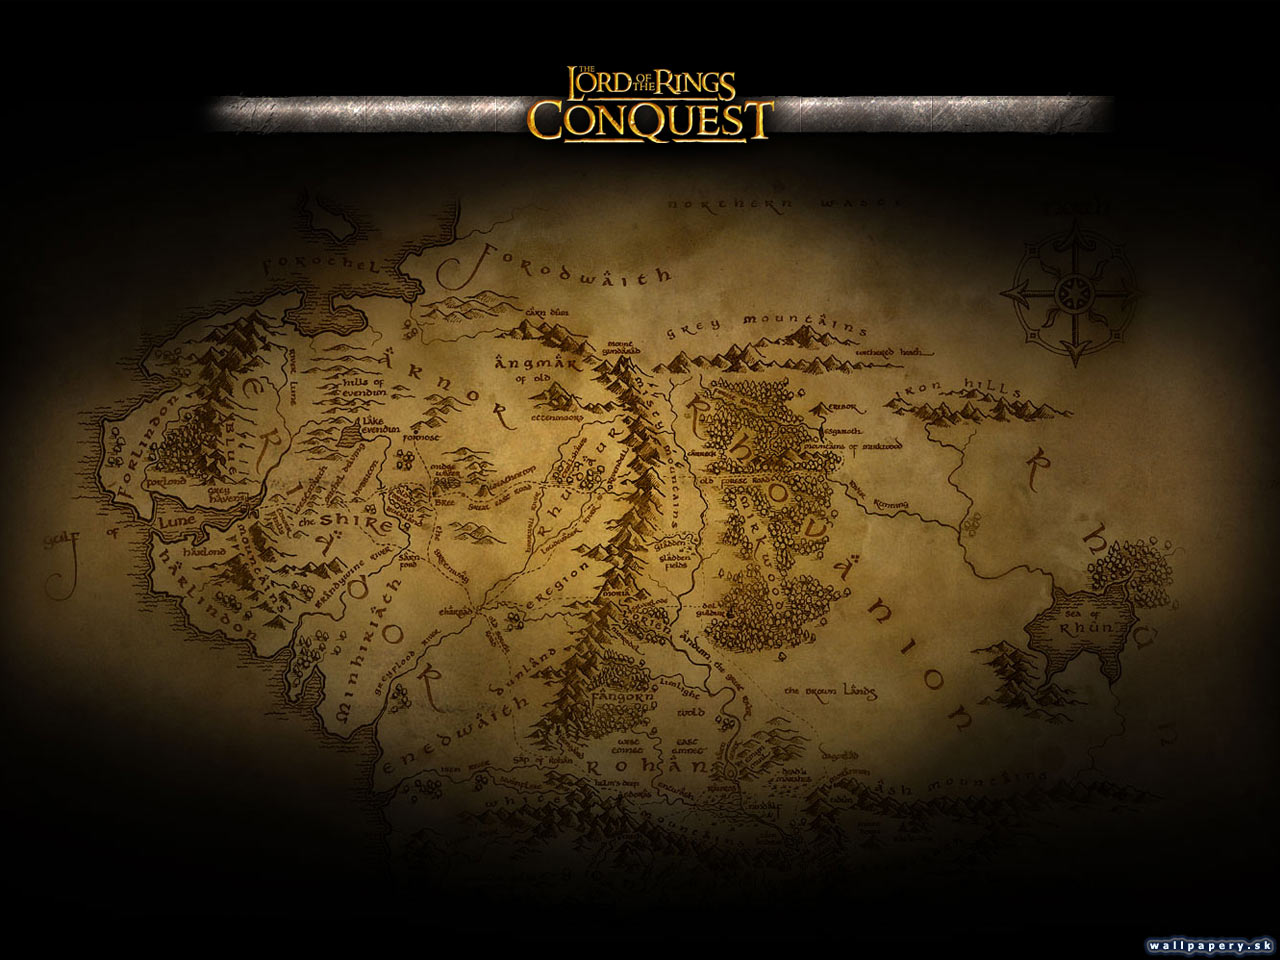 The Lord of the Rings: Conquest - wallpaper 2